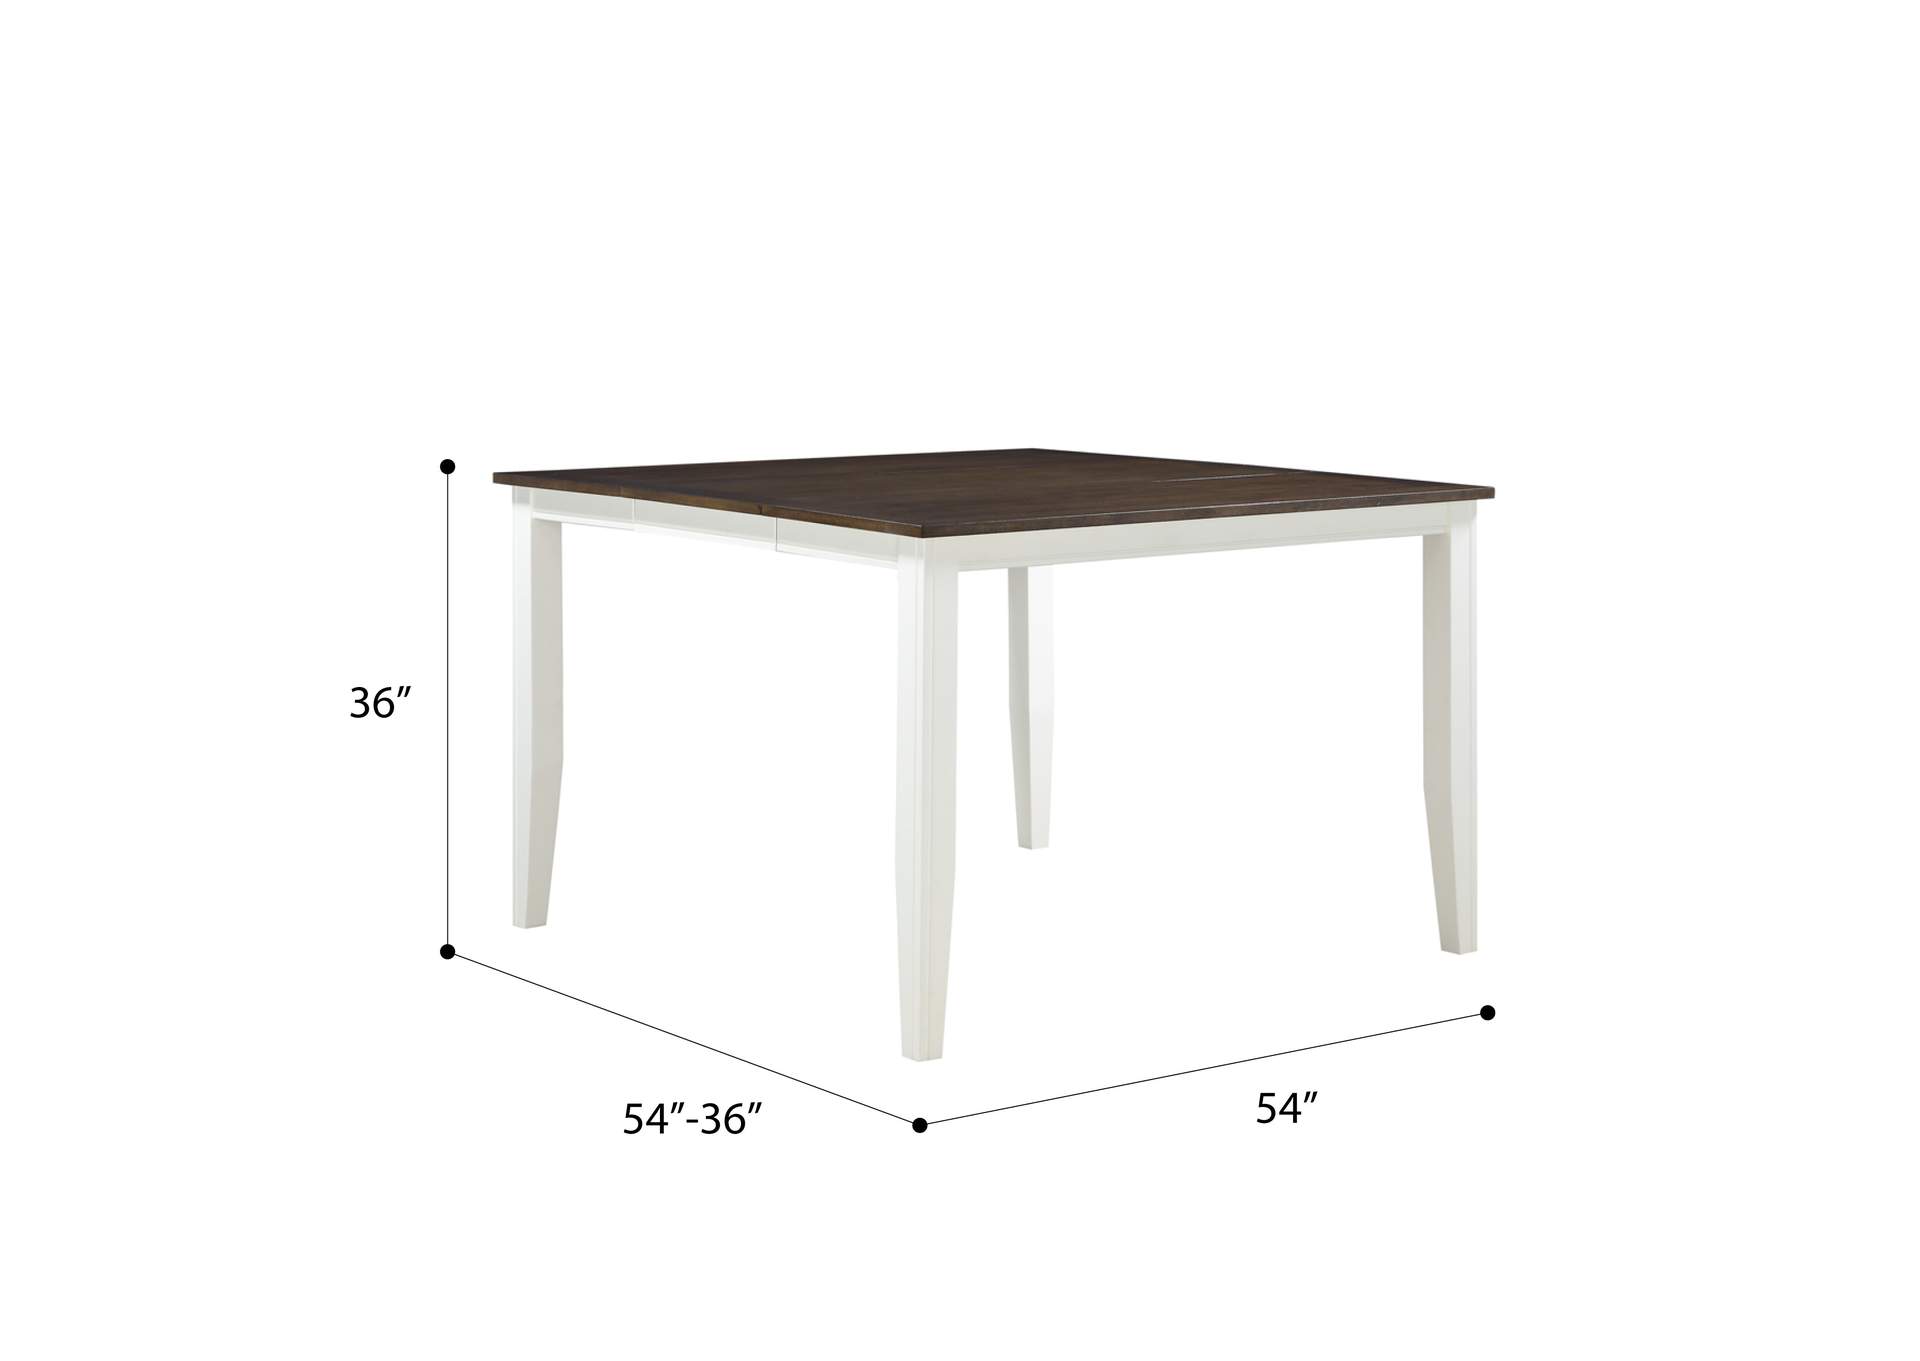 Sprague Gathering Height Table,Emerald Home Furnishings